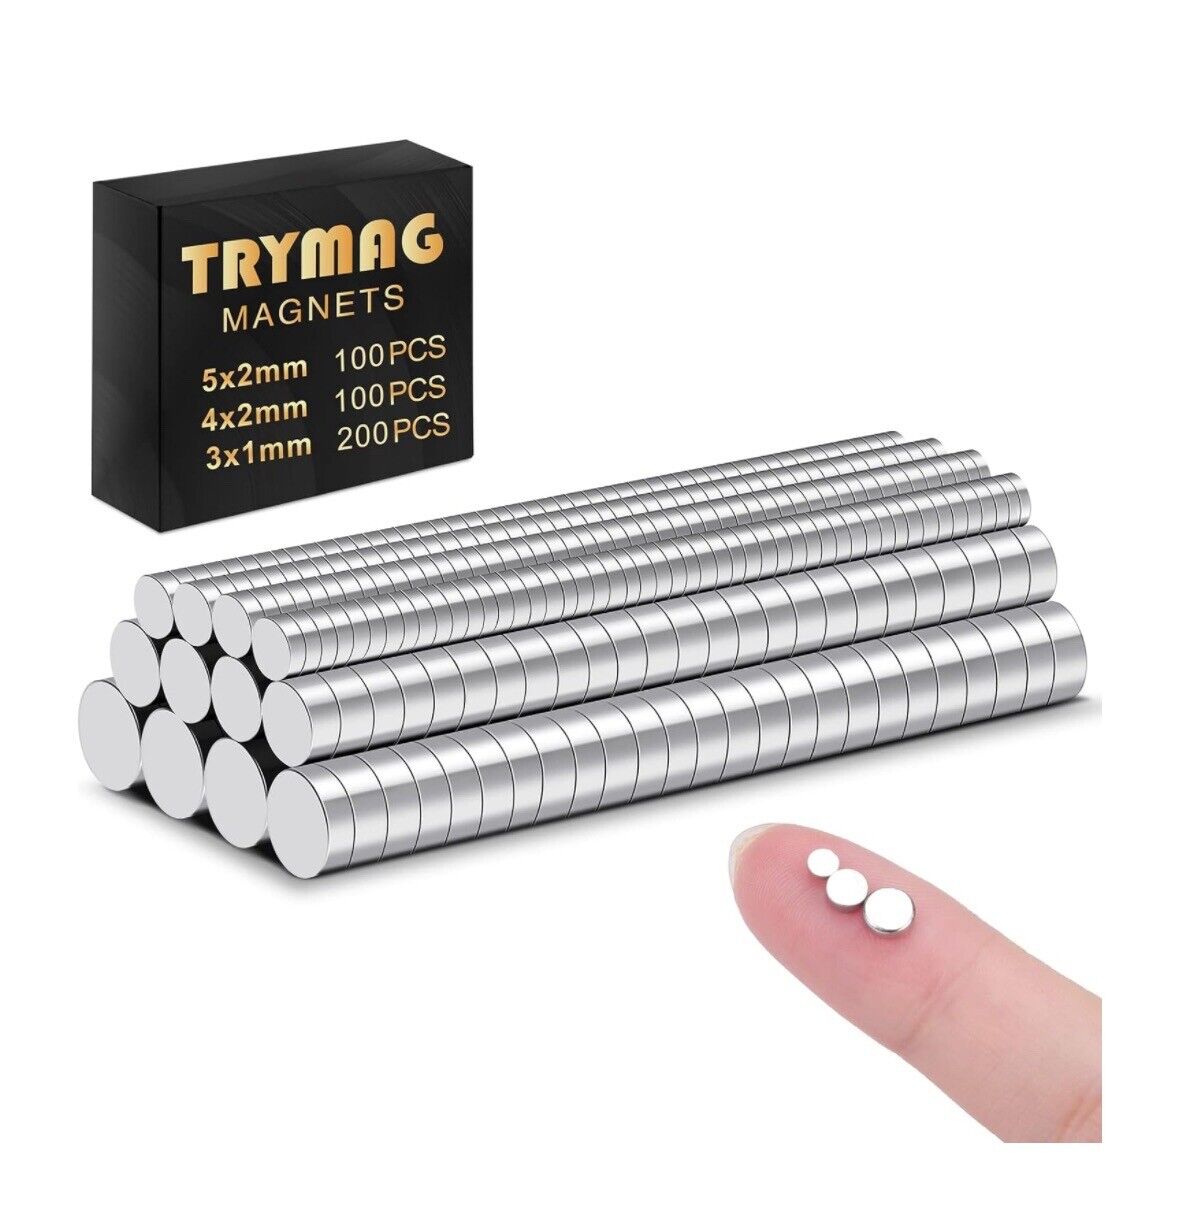 TRYMAG Small Magnets, 400Pcs Rare Earth Magnets, 3 Different Size Tiny Magnets